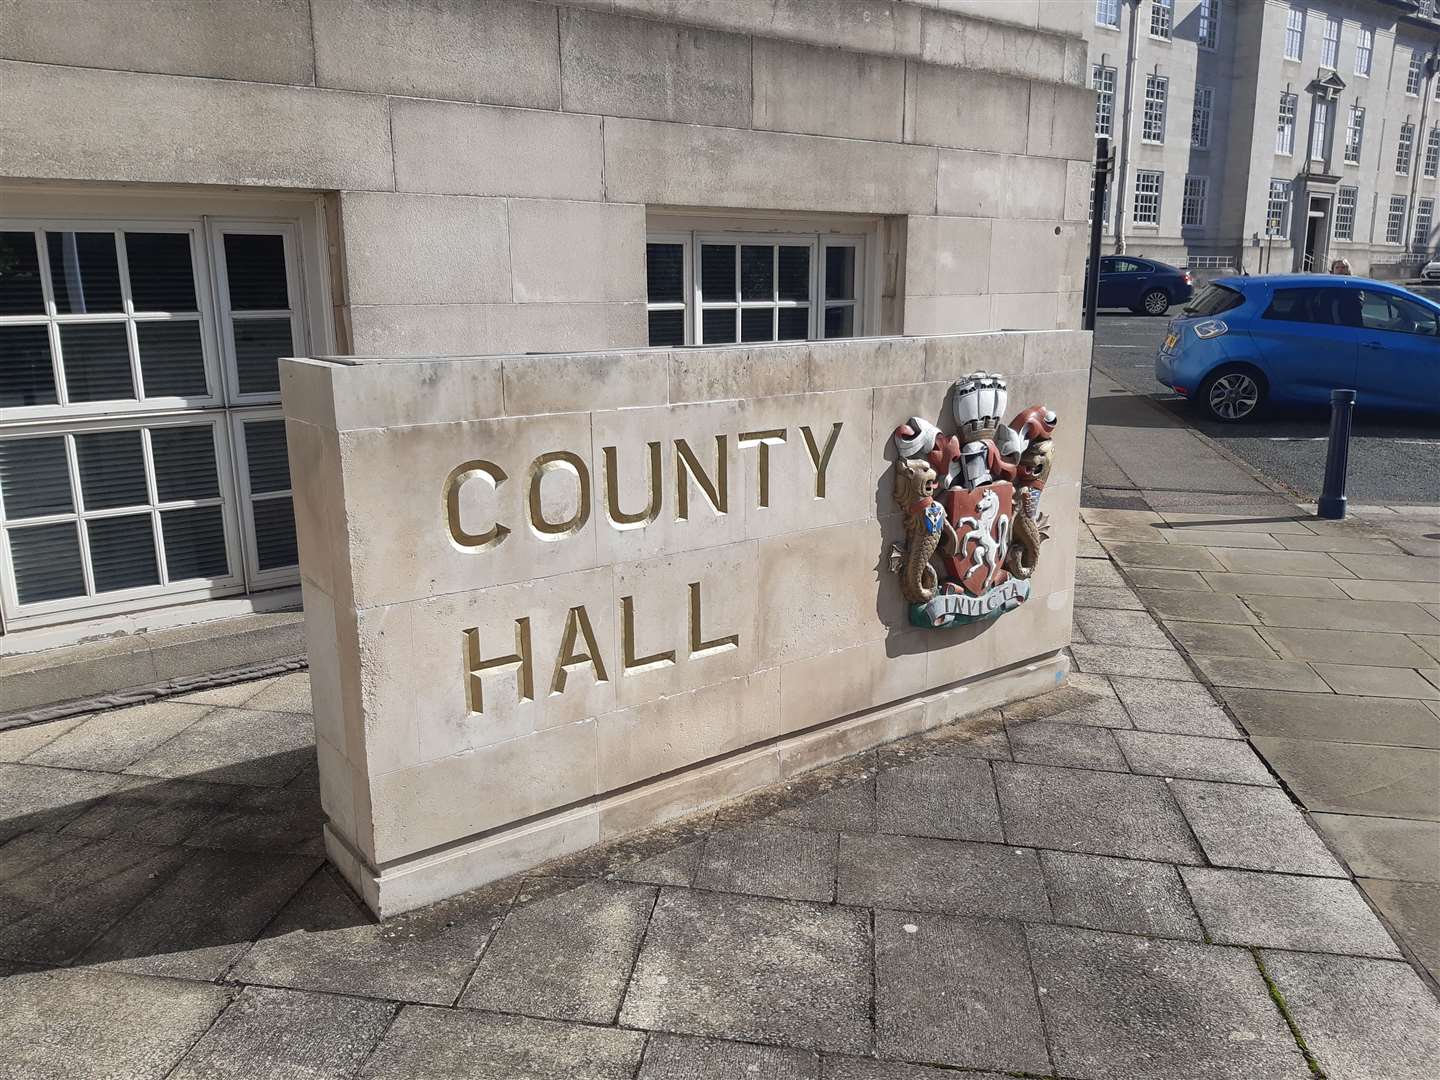 Kent County Council is facing significant financial pressures